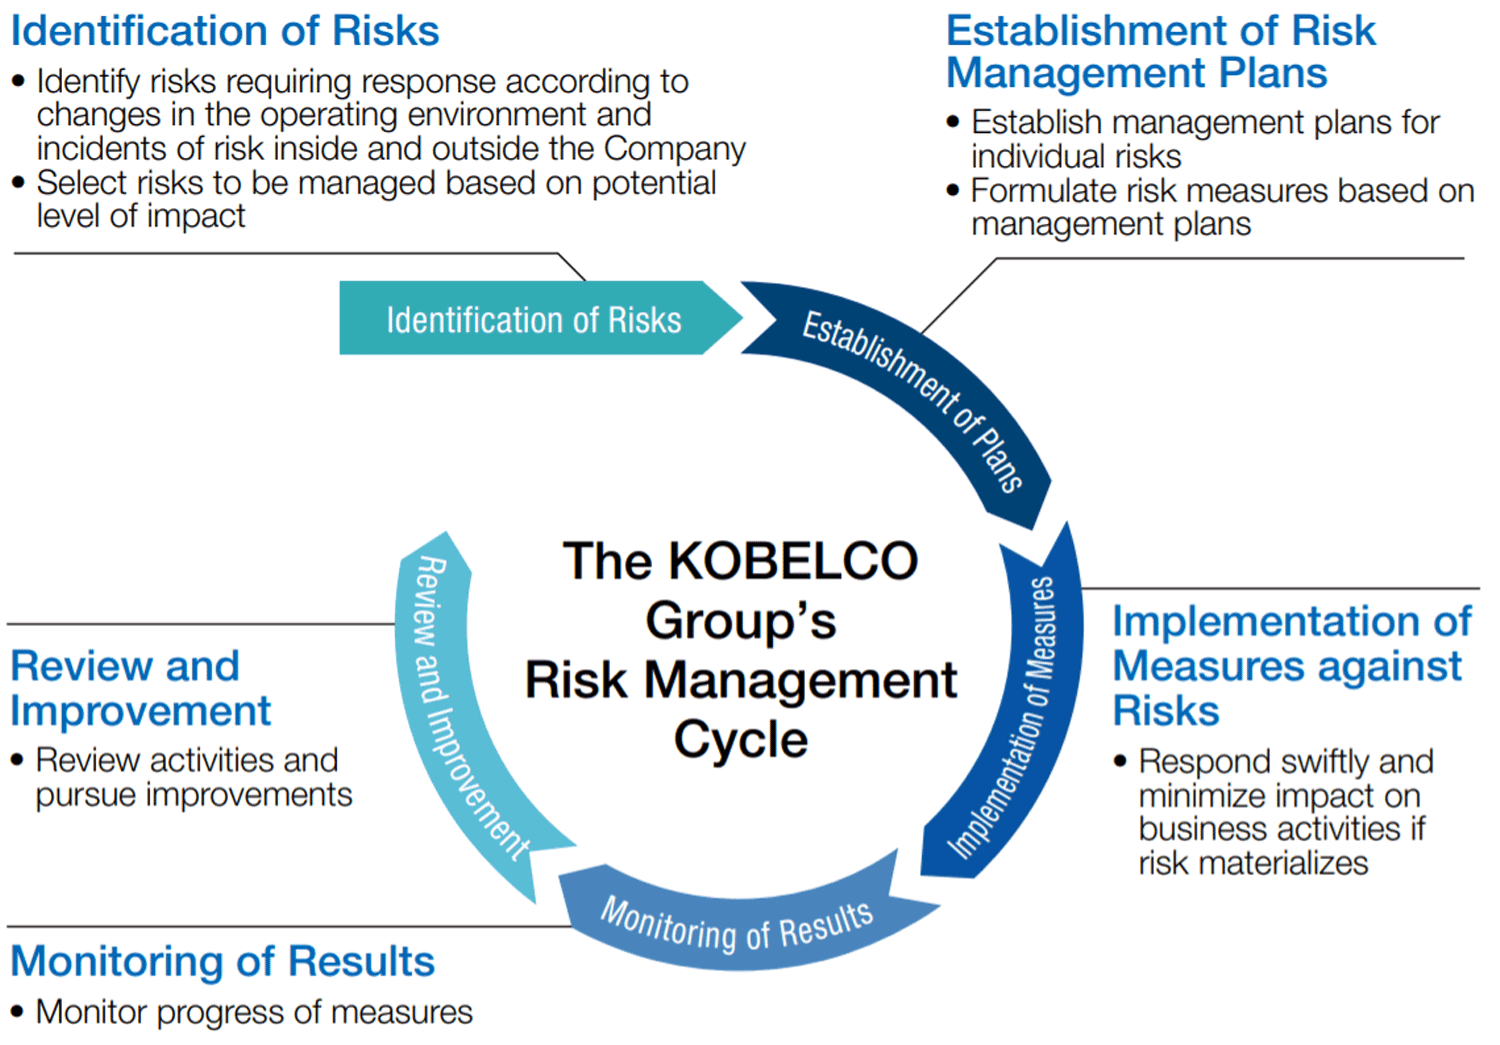 The KOBELCO Group’s Risk Management Cycle